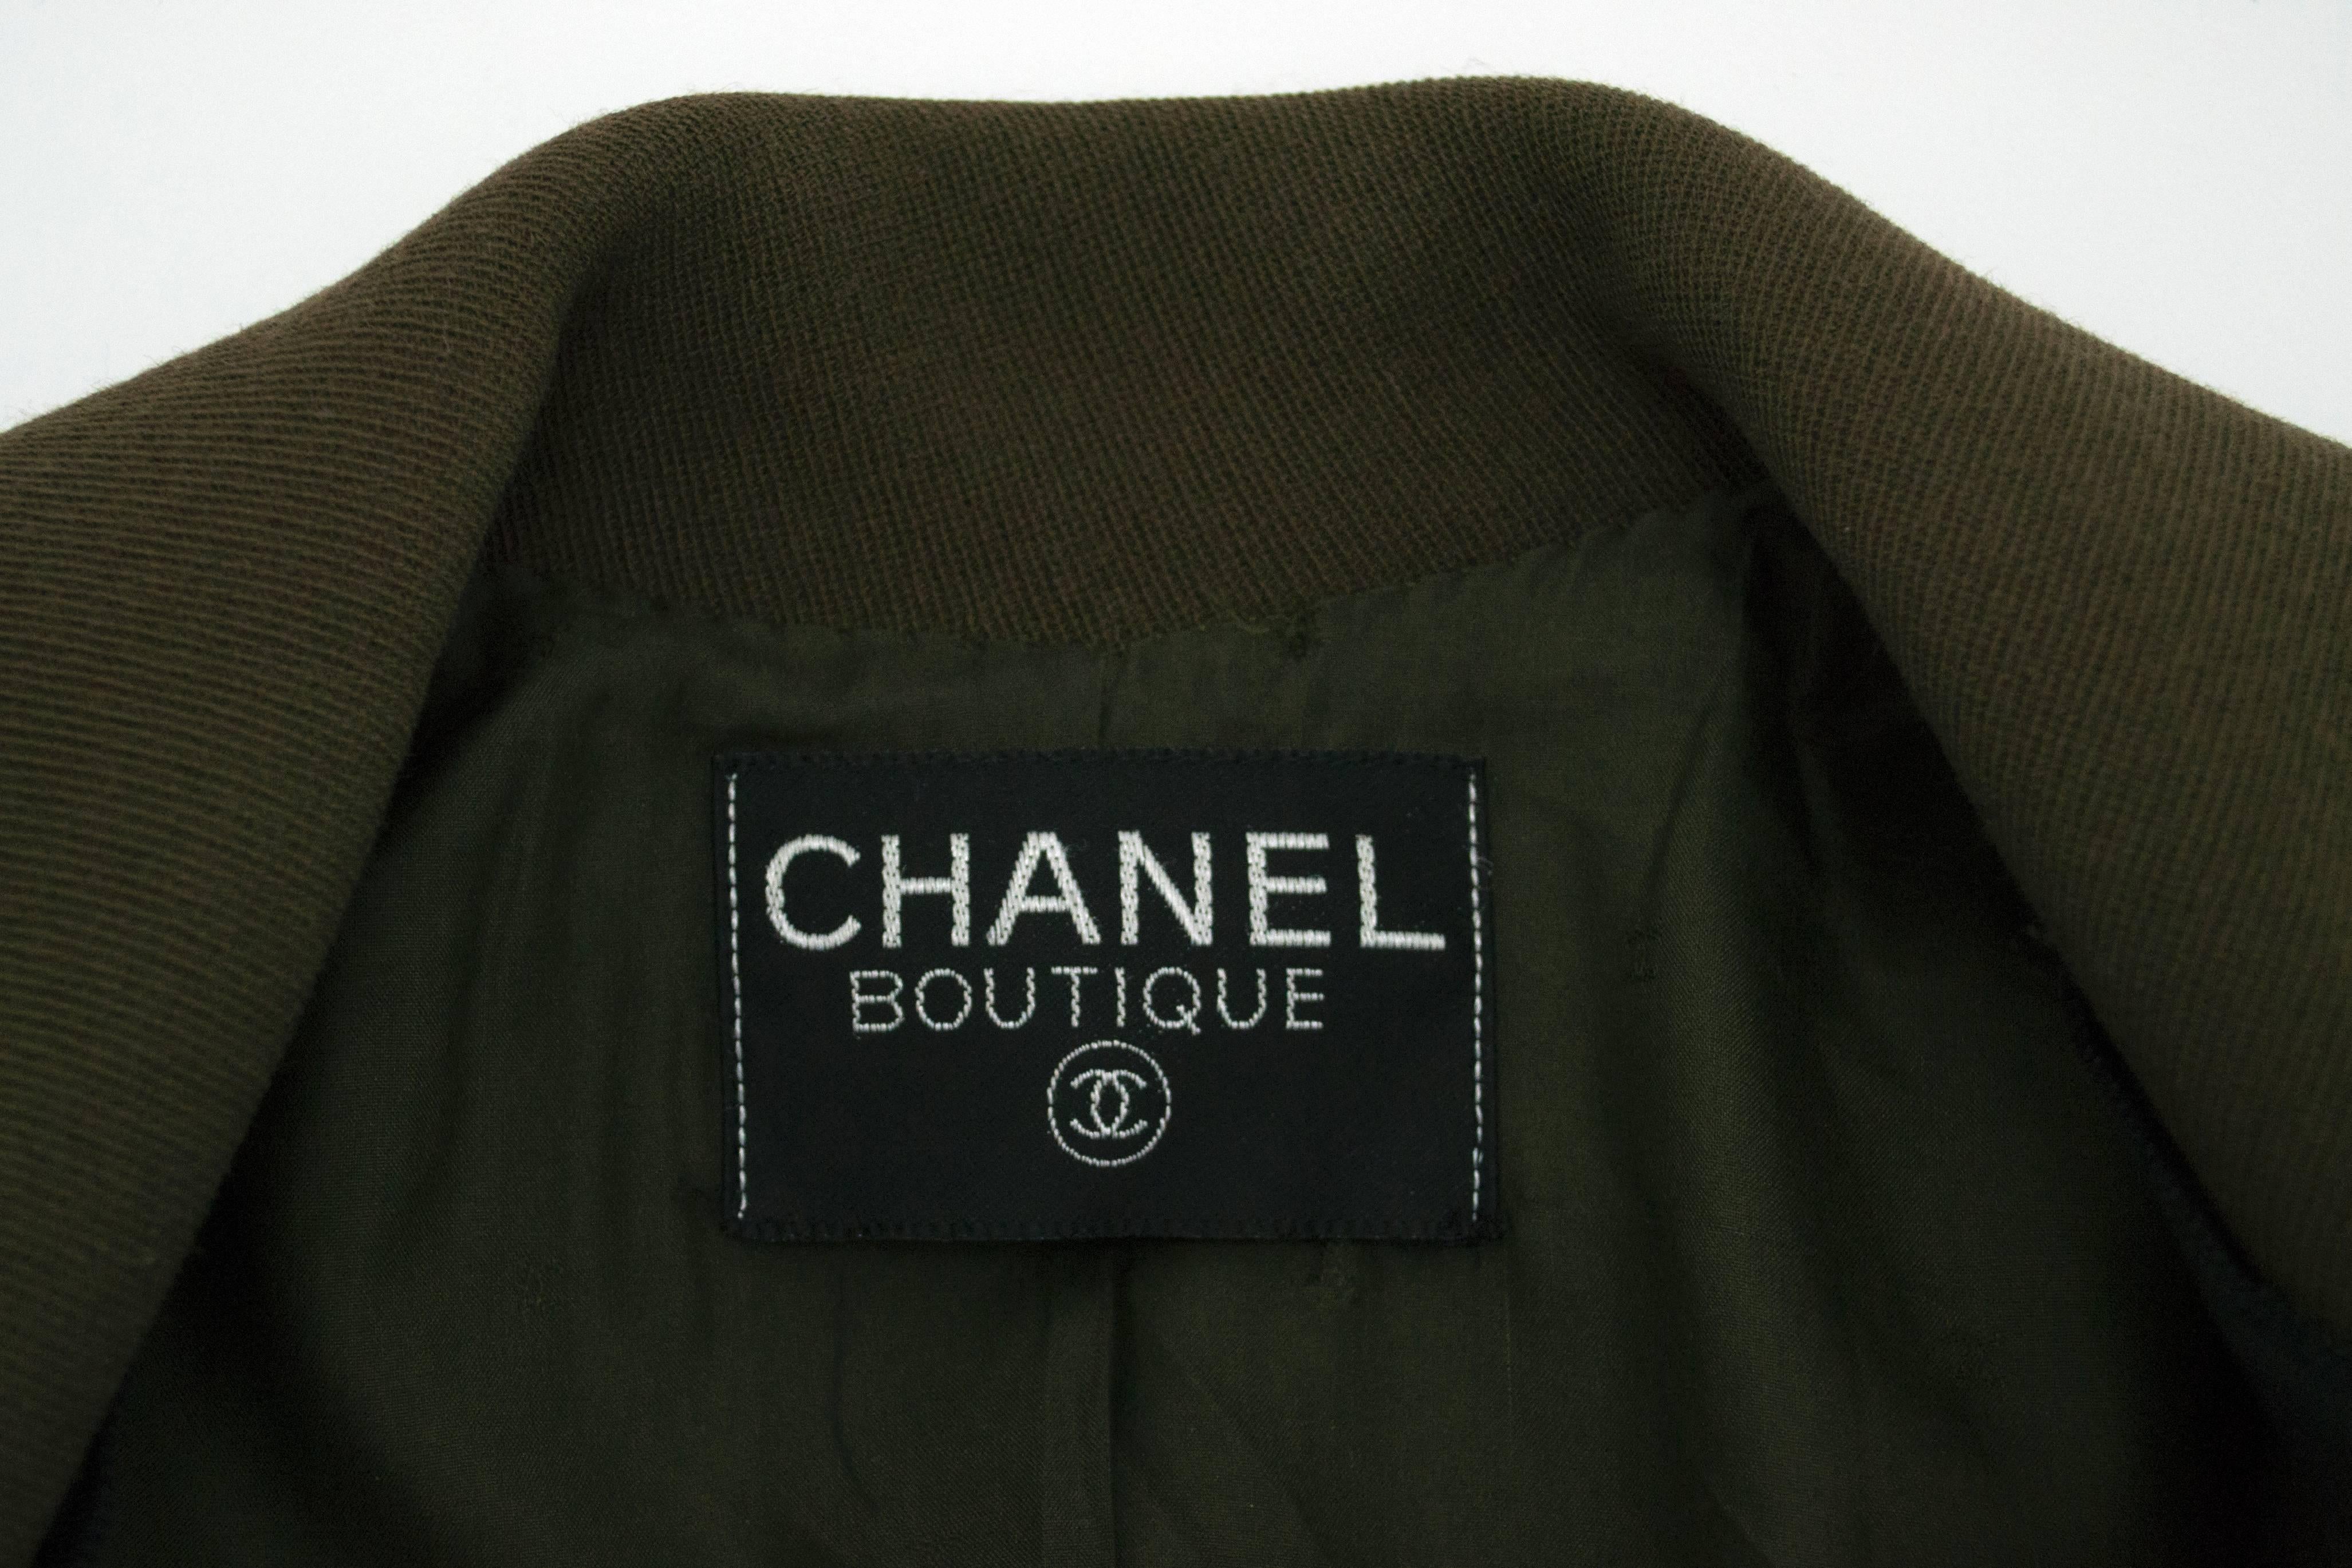 Chanel wool blend olive colored single breasted jacket with grosgrain black ribbon detail. Front hip pockets and black ribbon buttons with gold CC logo detail. Lined in signature olive silk CC lining. Sizing tag is not included. Please confirm